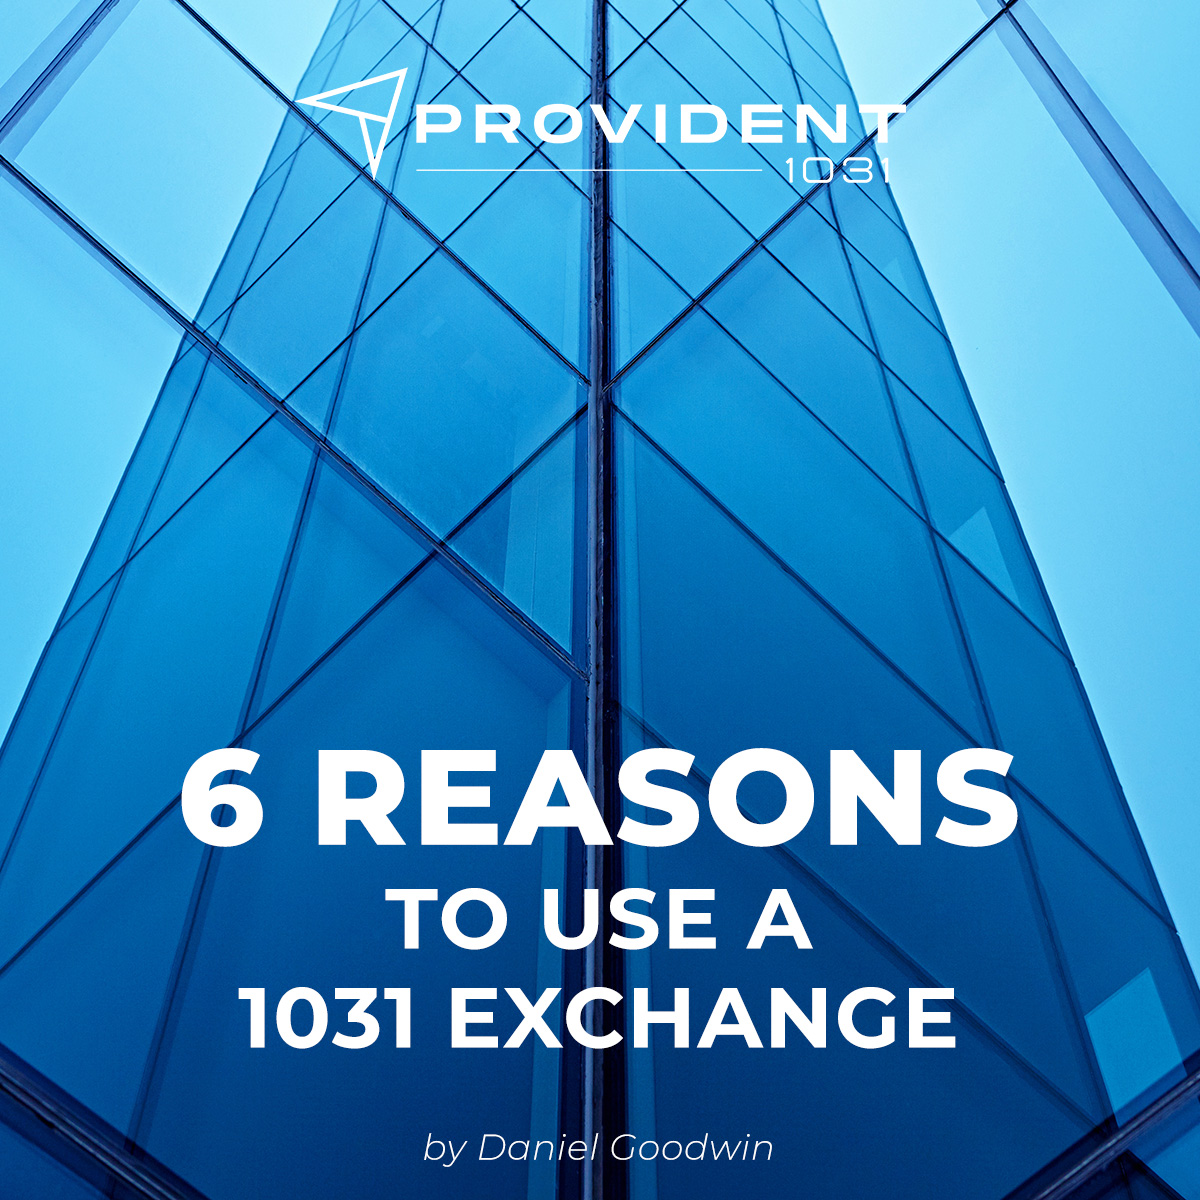 6 Reasons To Use A 1031 Exchange - by Daniel Goodwin